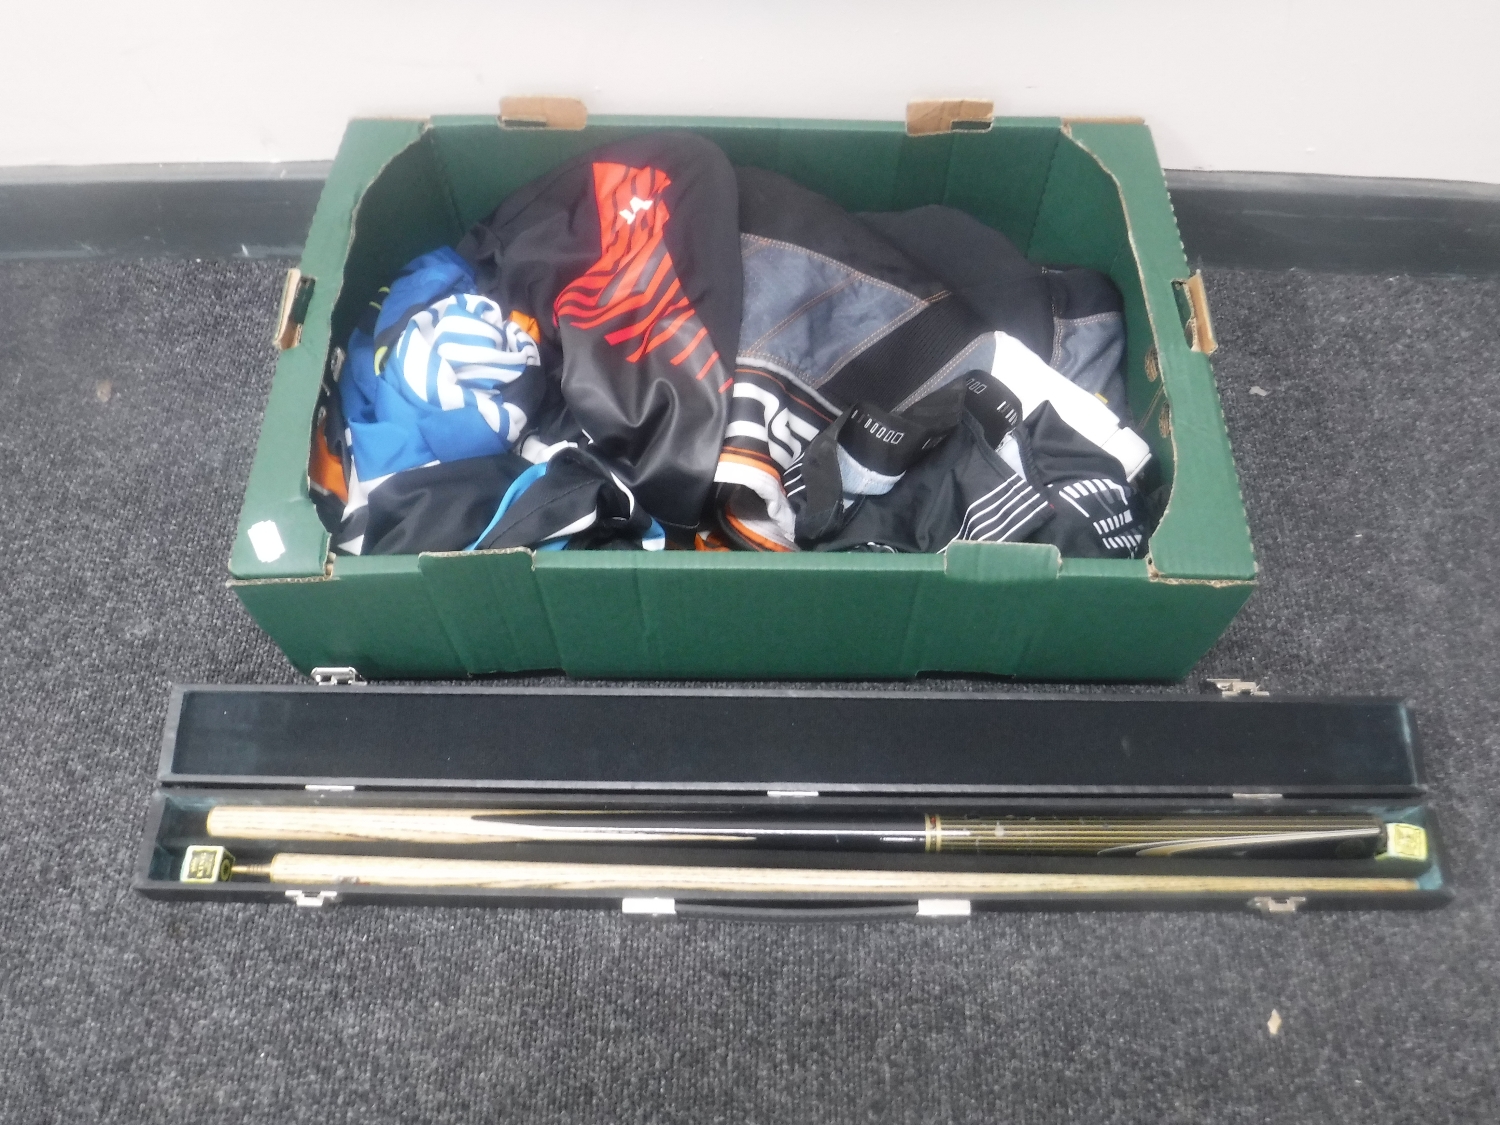 A box of motorcycle clothing,